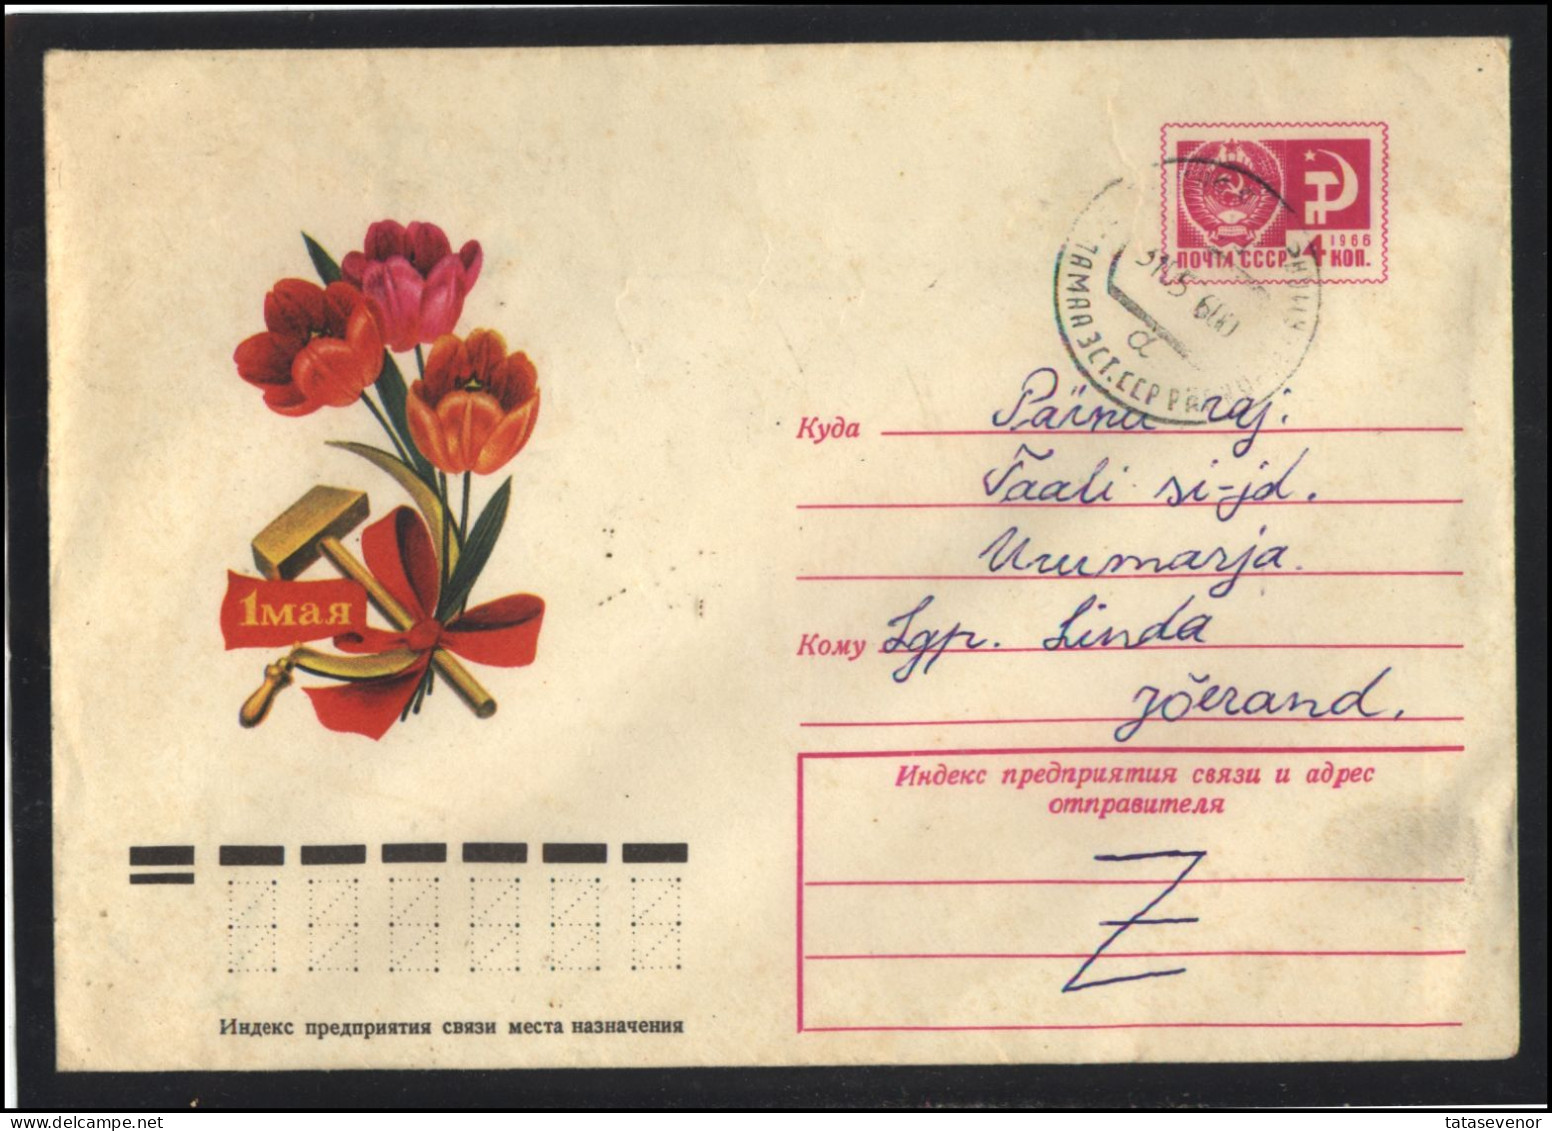 RUSSIA USSR Stationery USED ESTONIA AMBL 1359 AIAMAA May Day Celebration Flowers Tulips - Zonder Classificatie